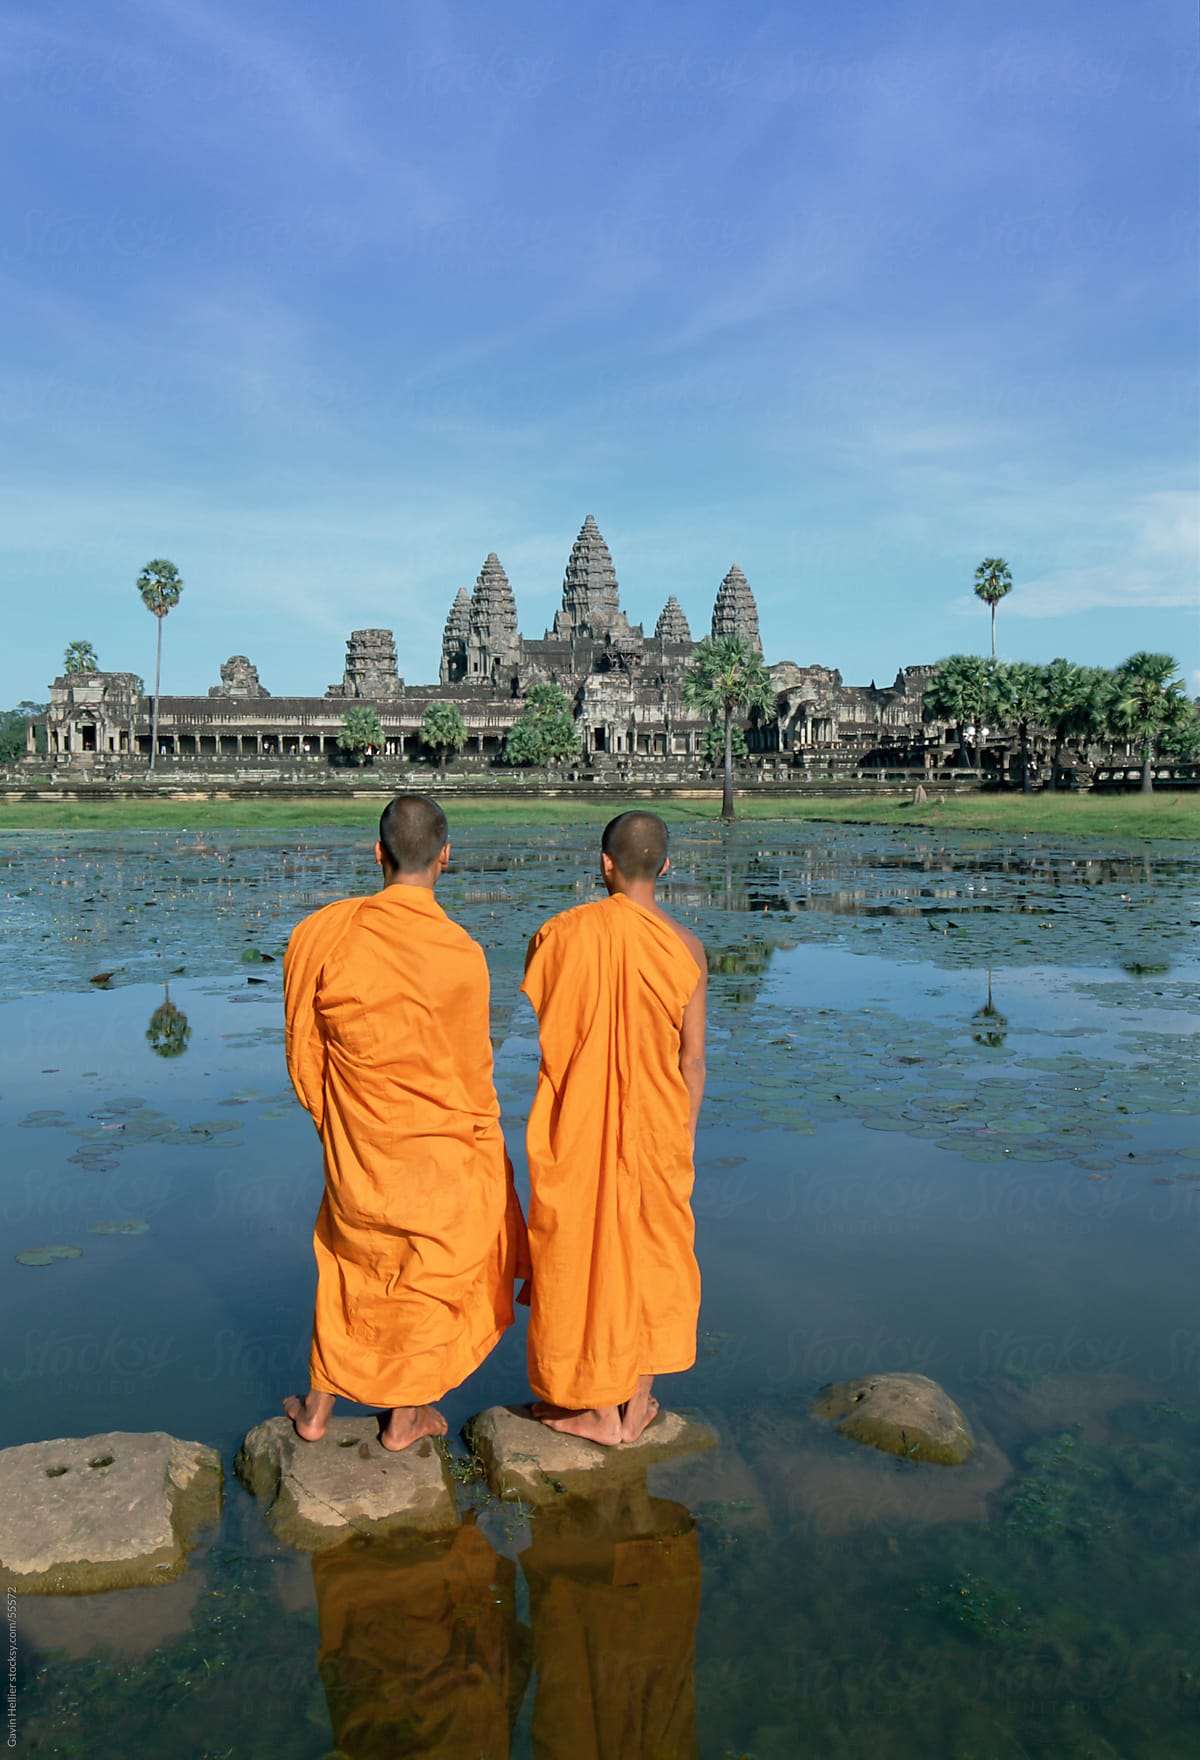 Buddhist monks standing in front of Angkor Wat, Angkor, Siem Reap, Cambodia, Indochina, Asia